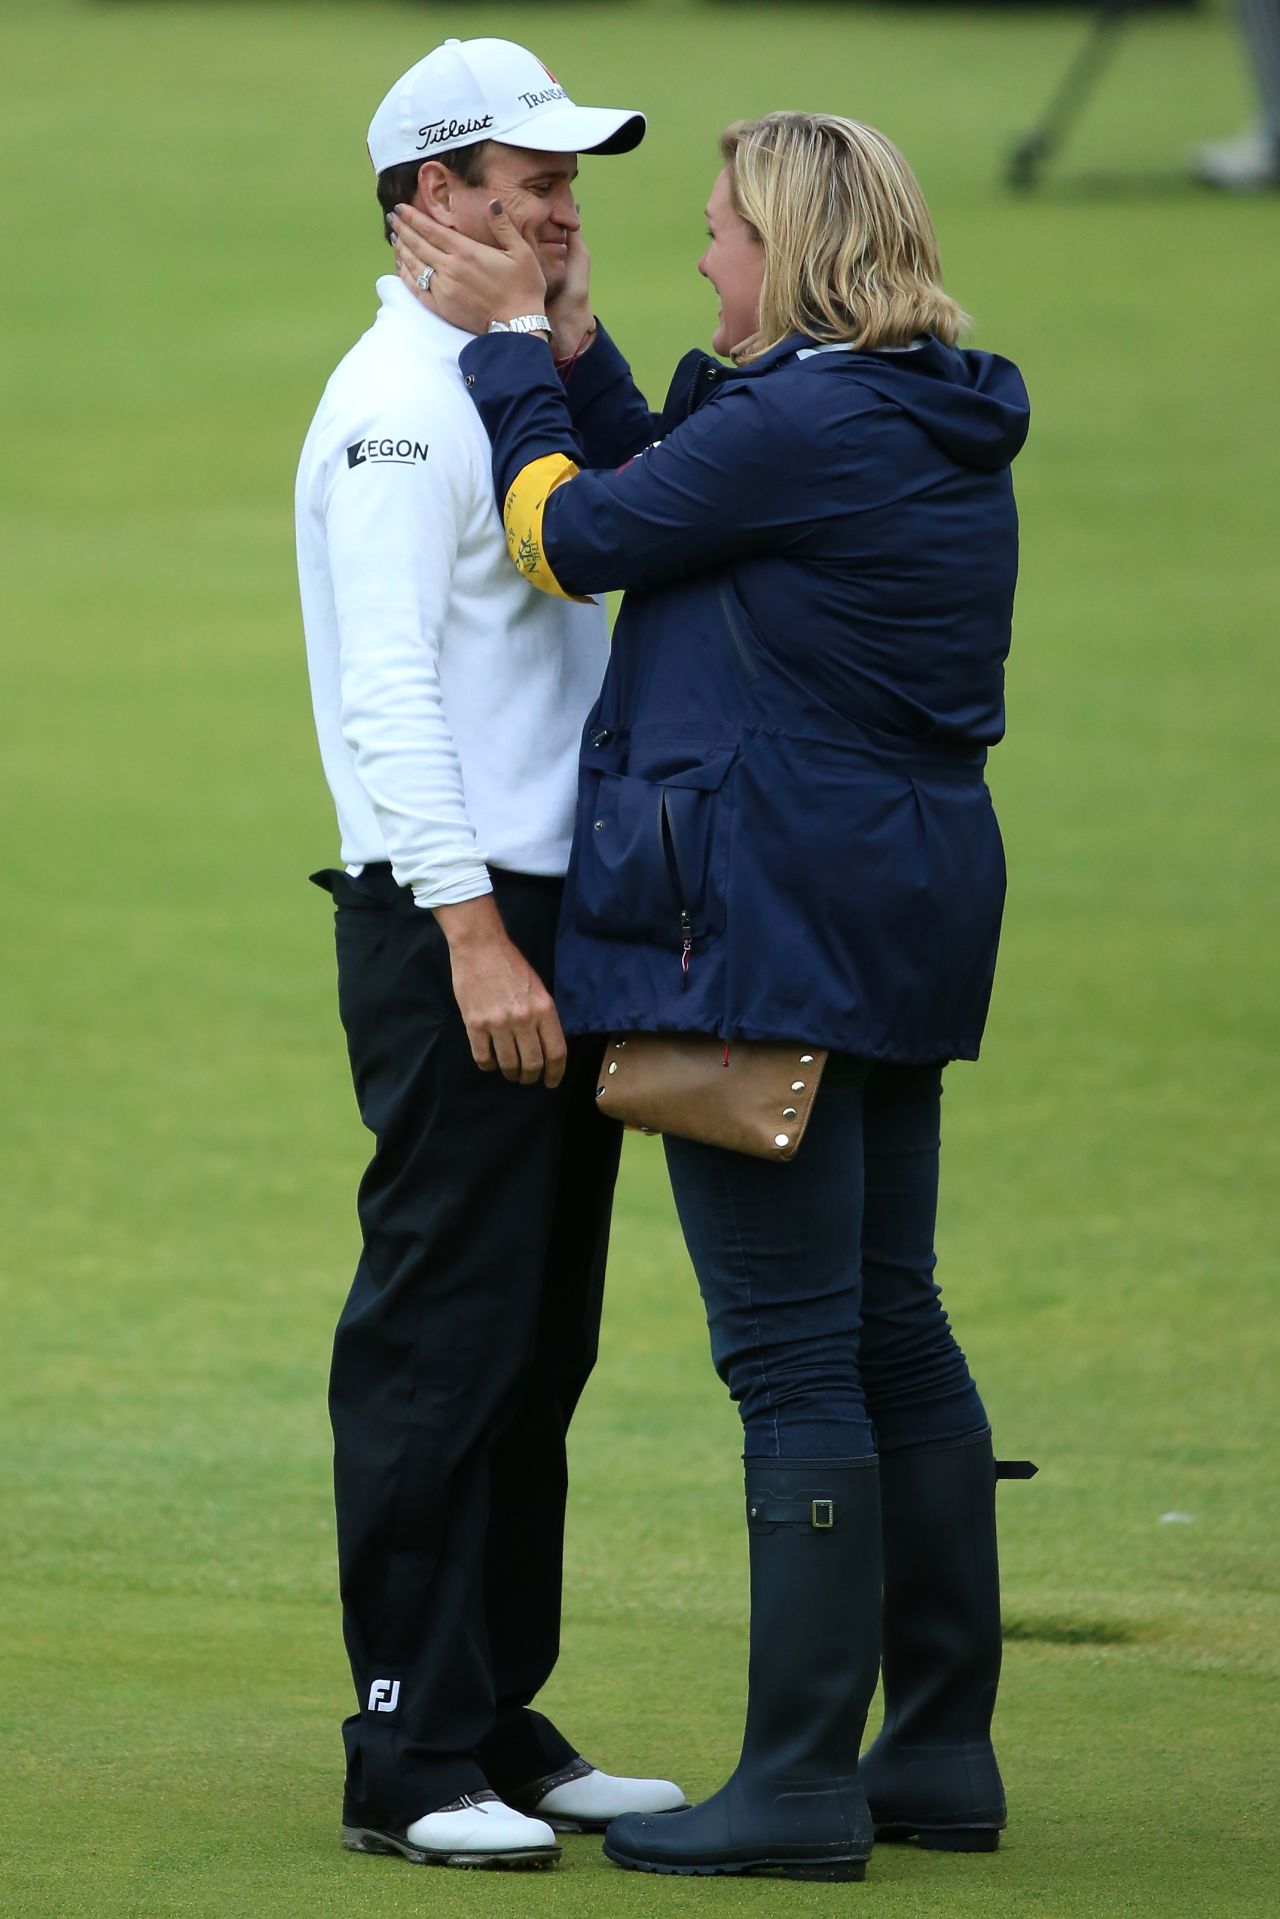 Zach Johnson celebrates with his wife Kim after winning the 144th Open Championship at St. Andrews' Old Course.